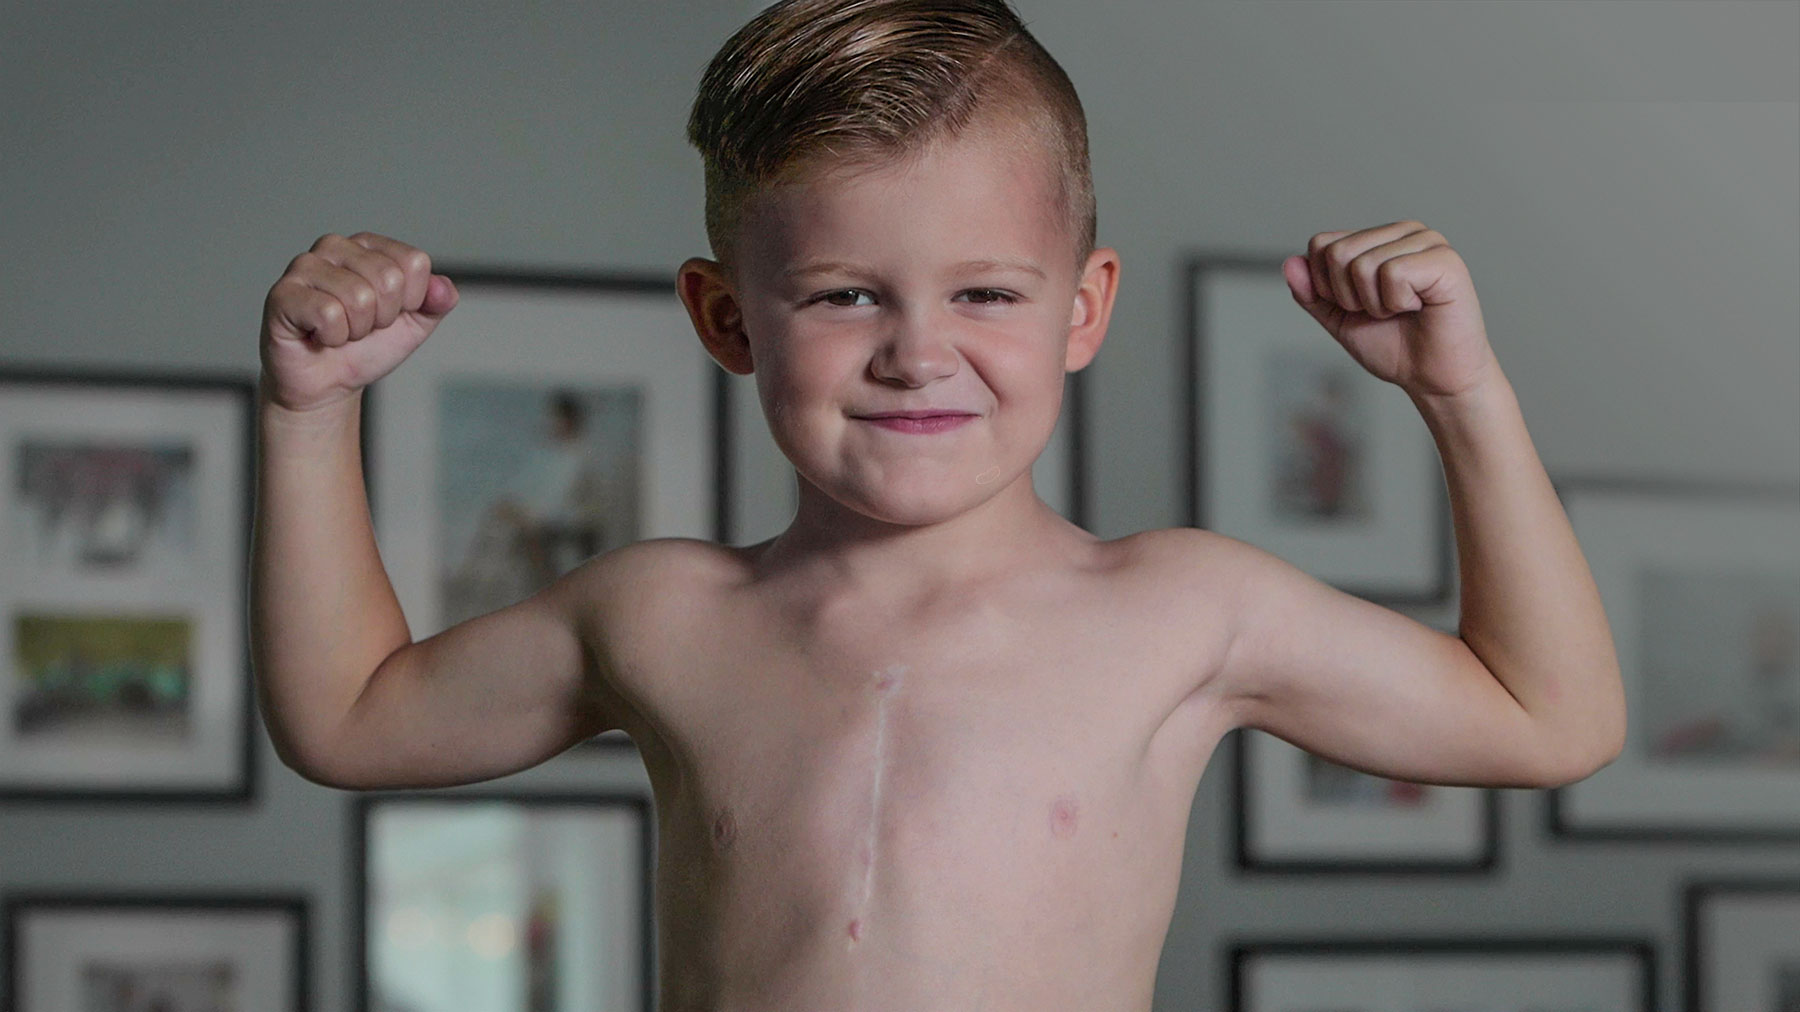 An image of a young boy (maybe 5 years old) with no shirt on pumping both fists with a very confident and strong look on his face. You can you can see his heart surgery scar down the middle of his chest. He is proud to show it off.